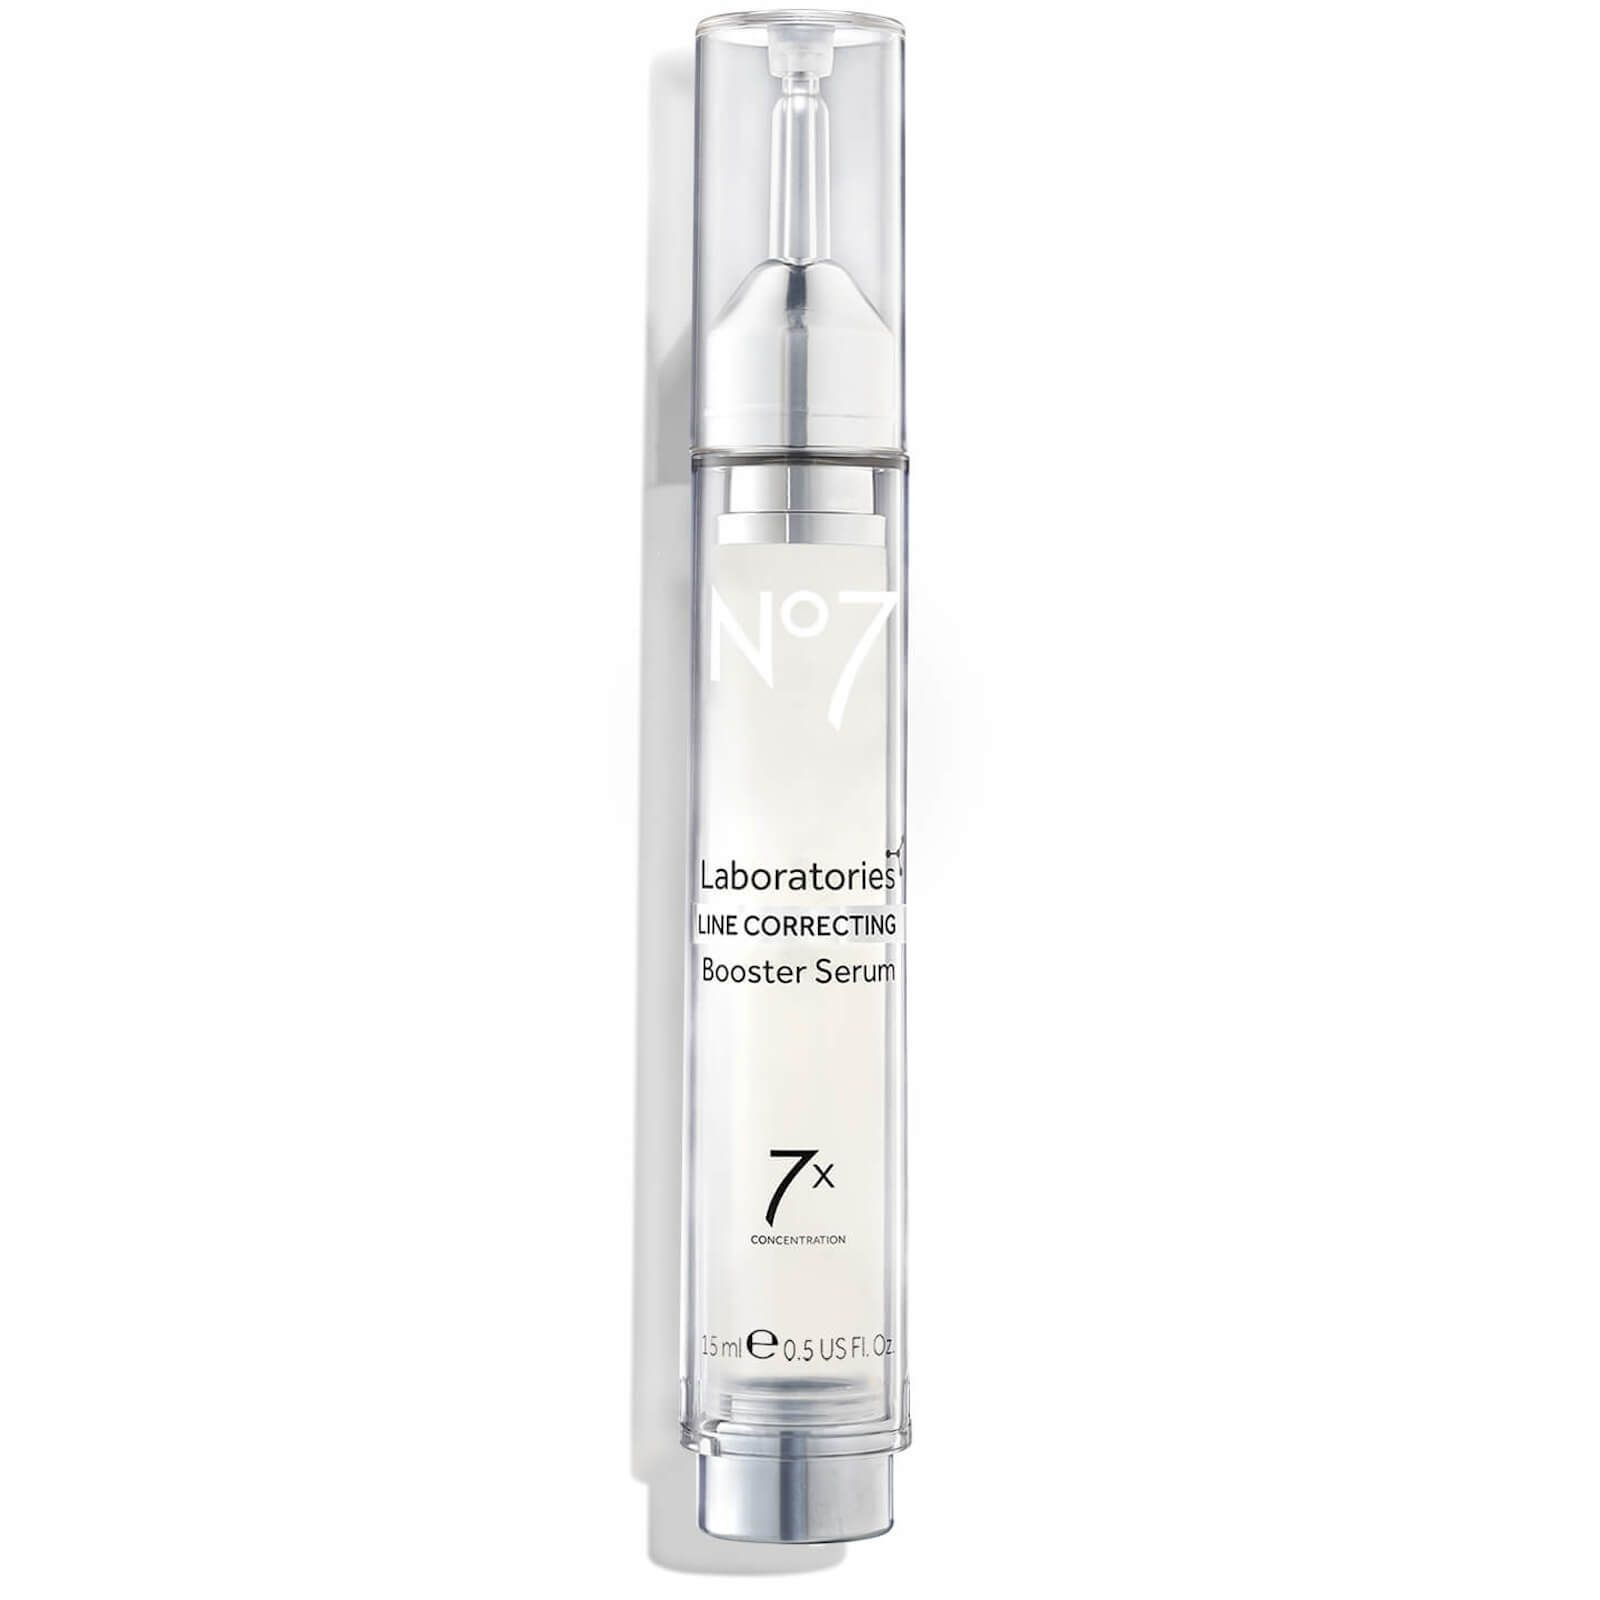 No7 Laboratories Line Correcting Booster Serum (Various Sizes) | No7 Beauty US